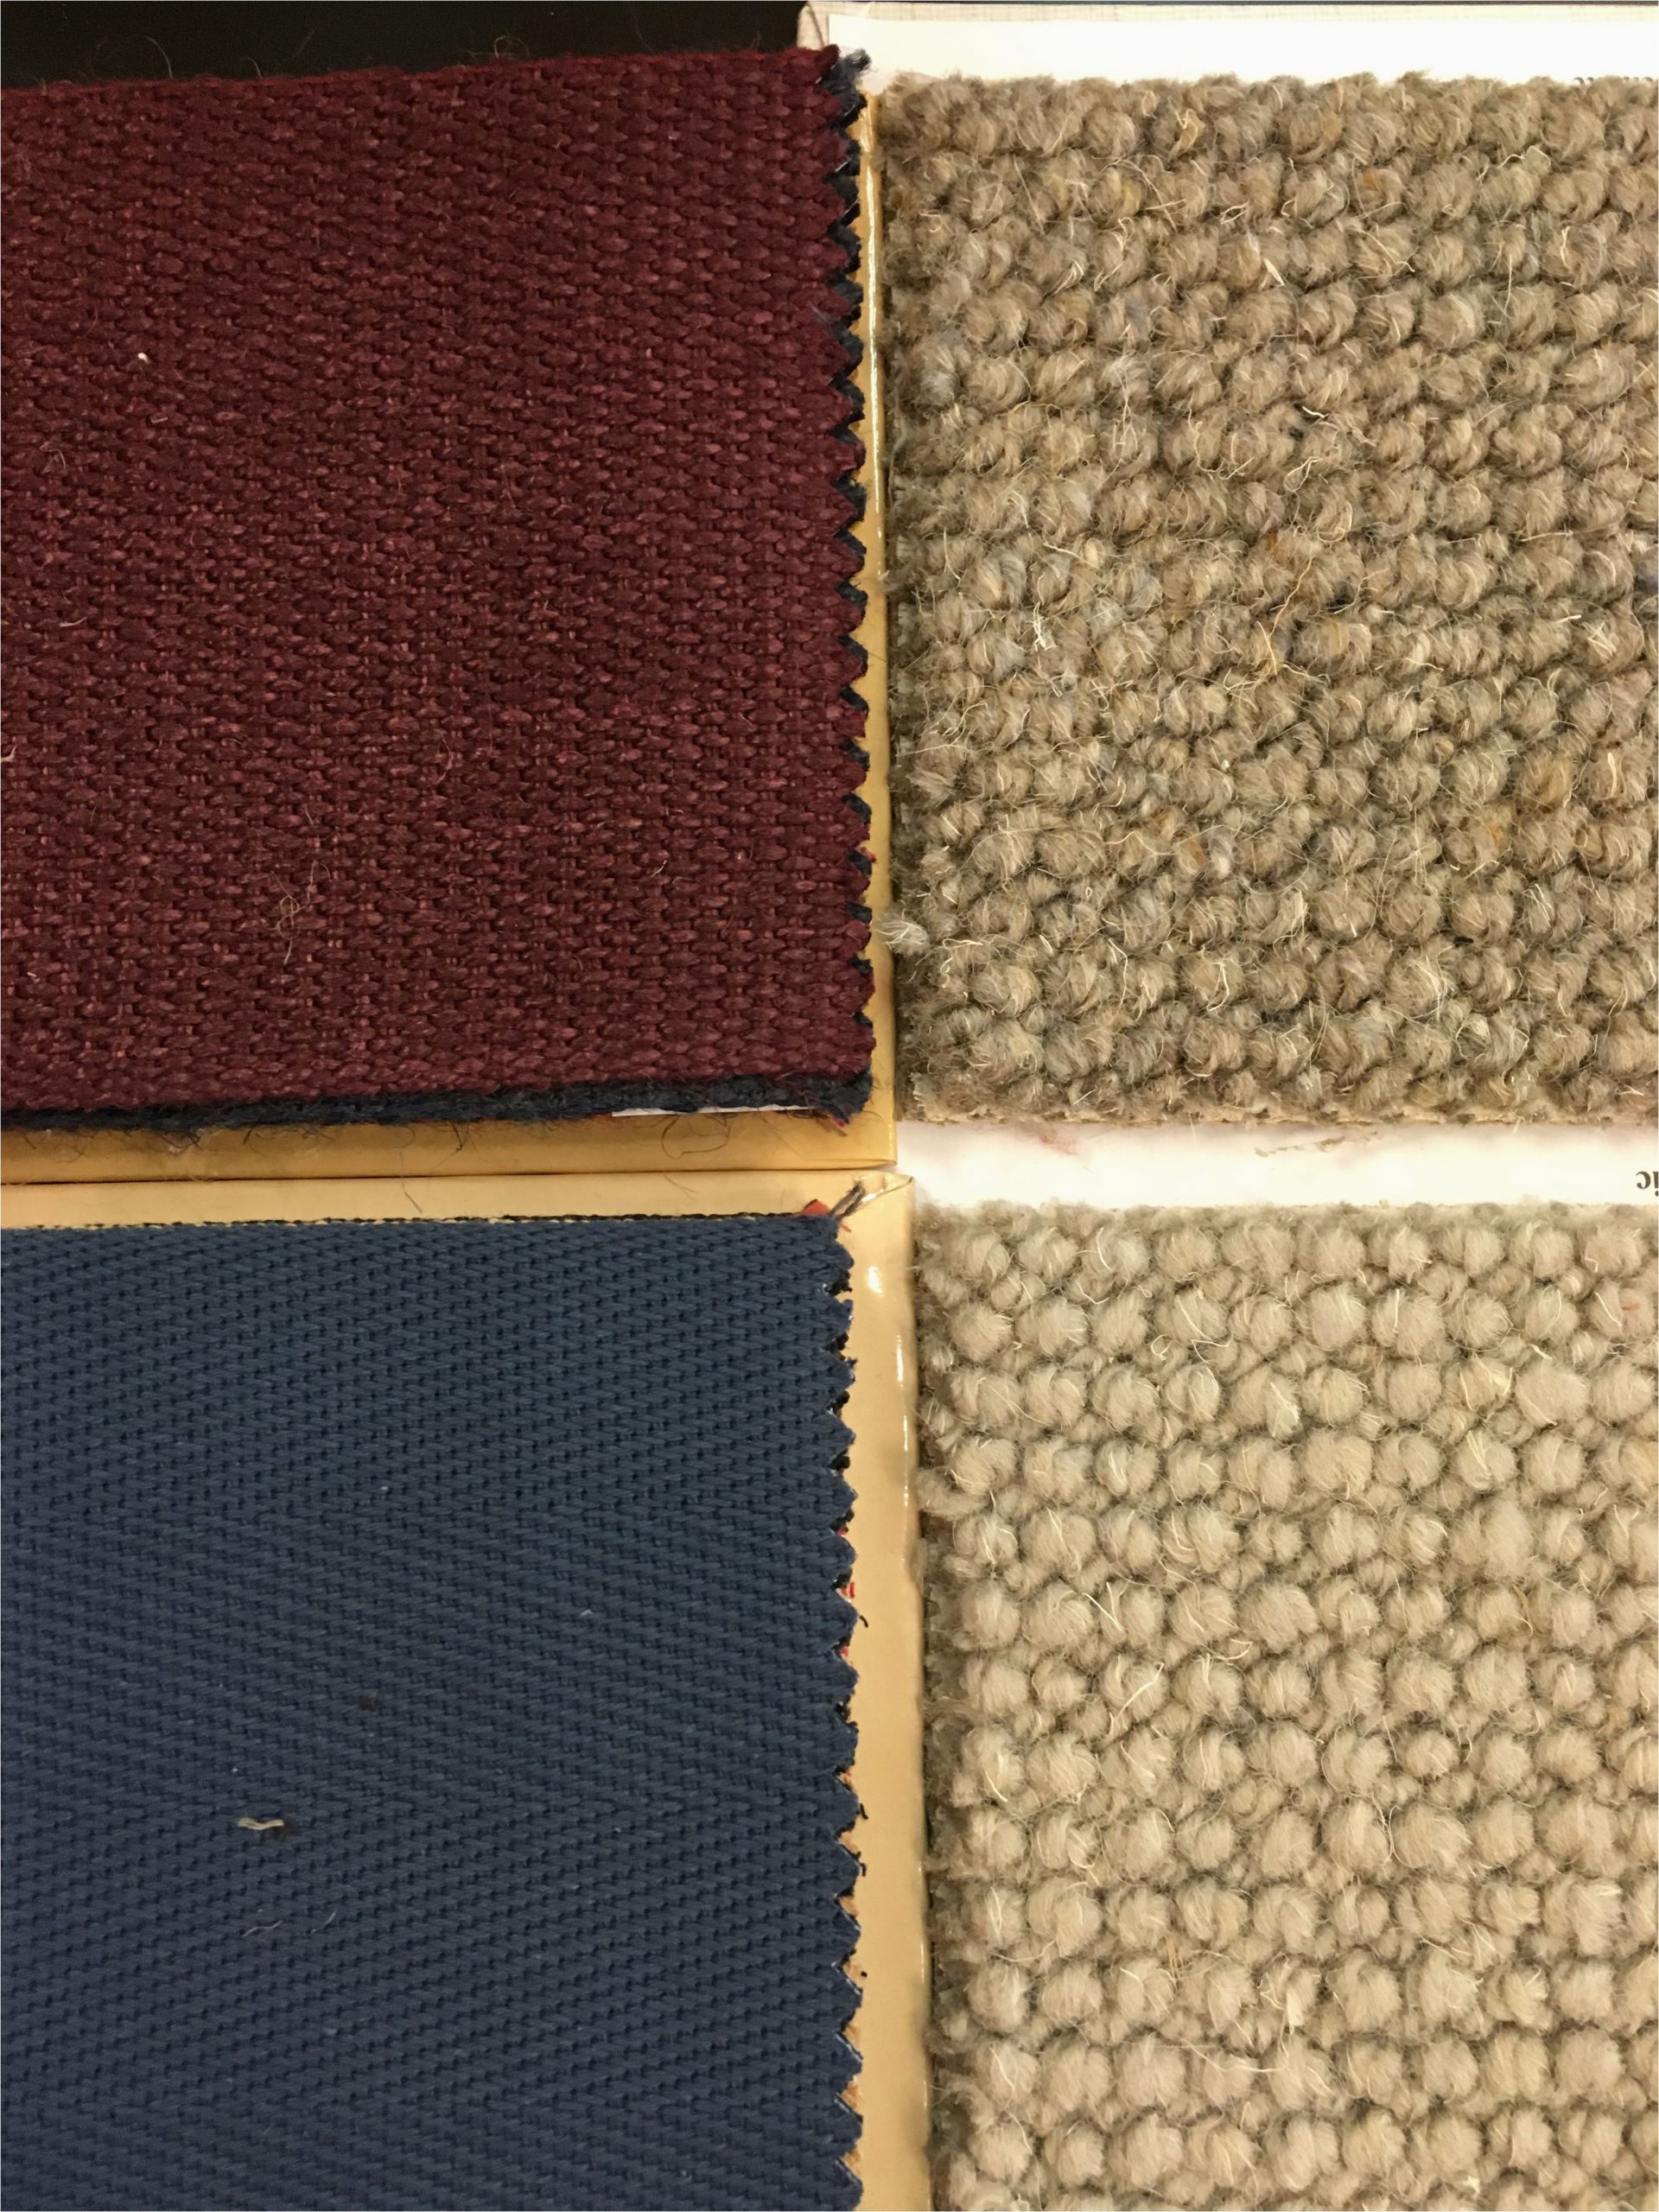 Binding Carpet for area Rug Edging Options to Add Color with Binding On area Rug